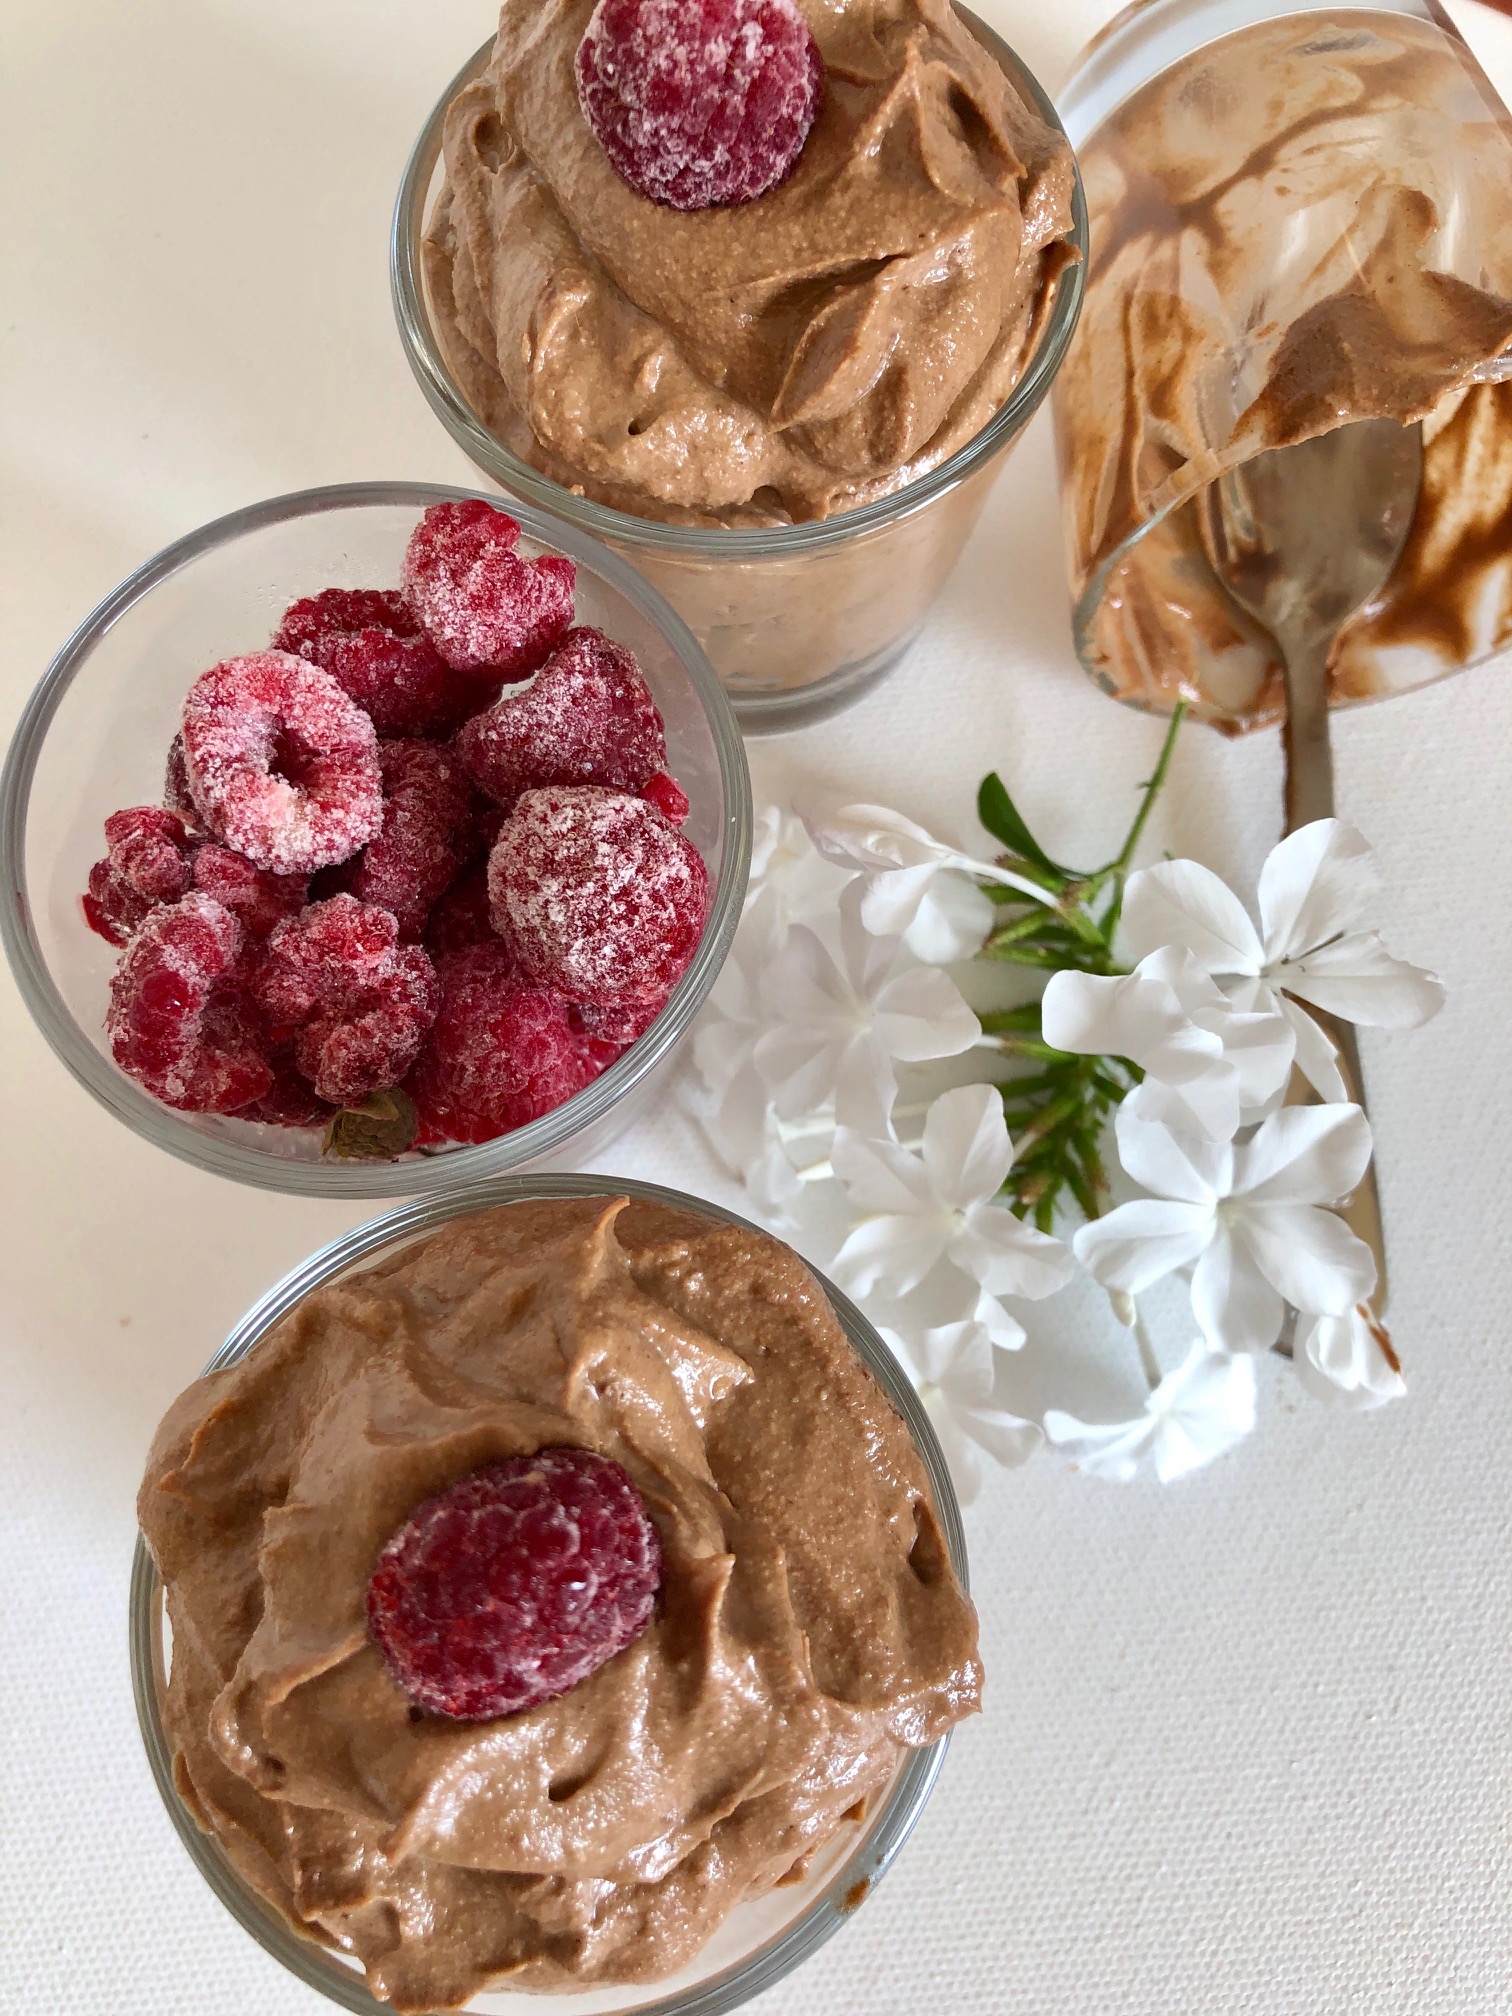 The easiest, yummiest Vegan Chocolate Mousse you'll ever eat!!!